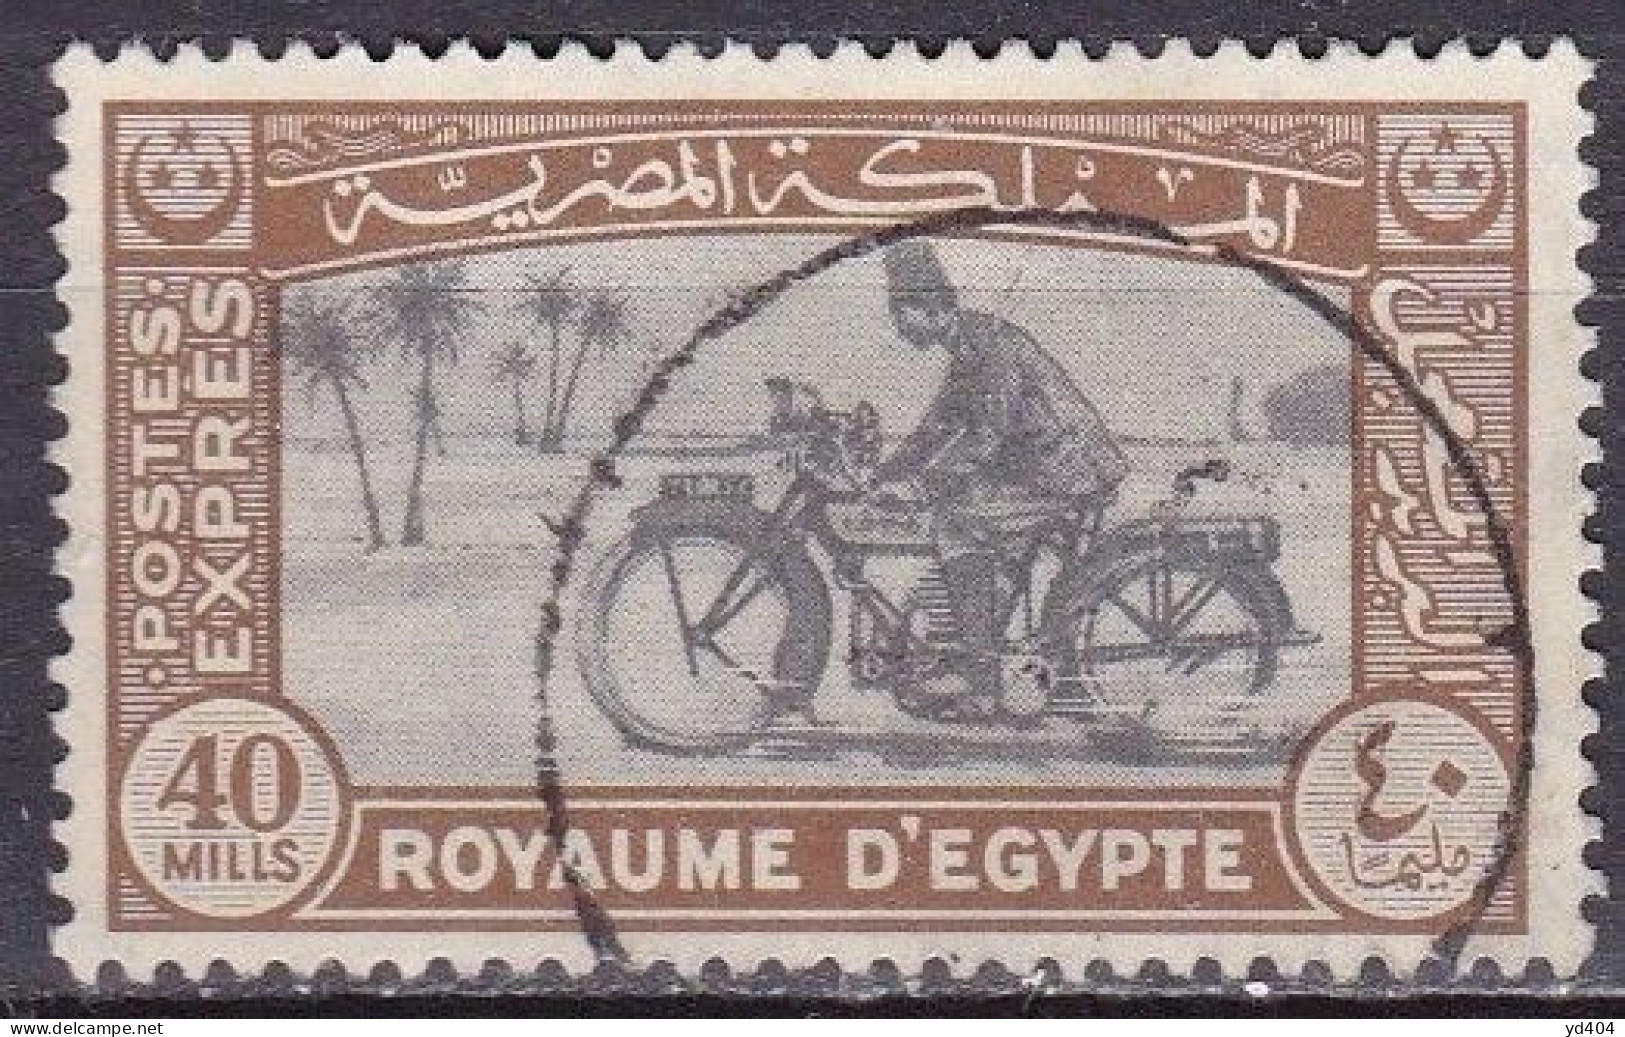 EG903 – EGYPTE – EGYPT – EXPRESS – 1943-44 – MOTORCYCLE POSTMAN – Y&T # 4 USED 6 € - Used Stamps